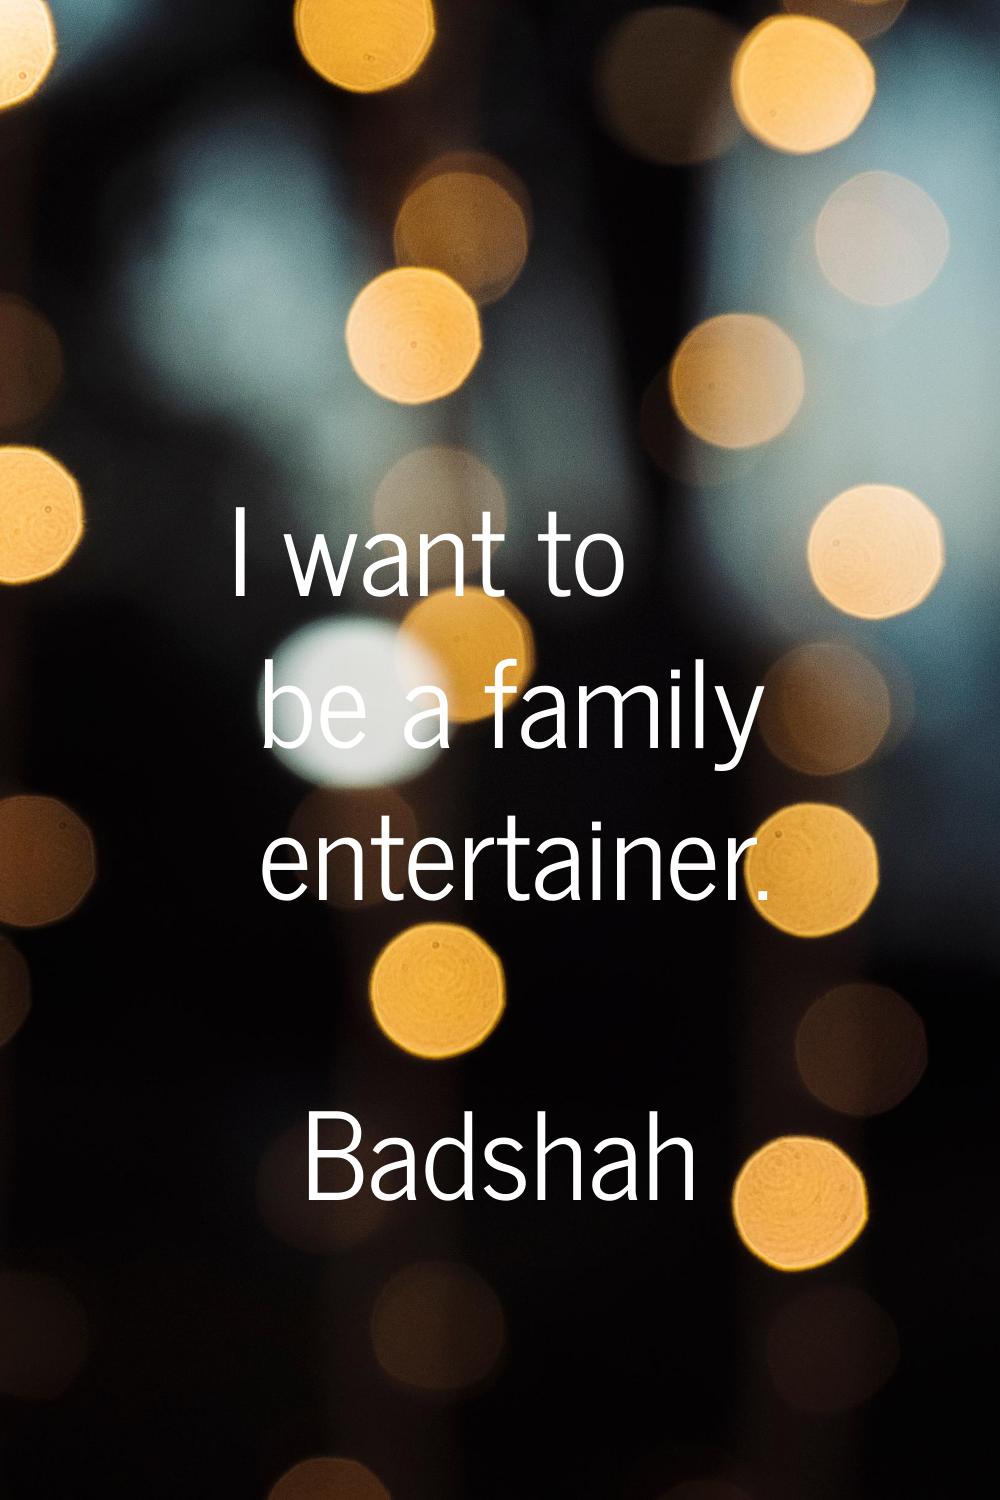 I want to be a family entertainer.